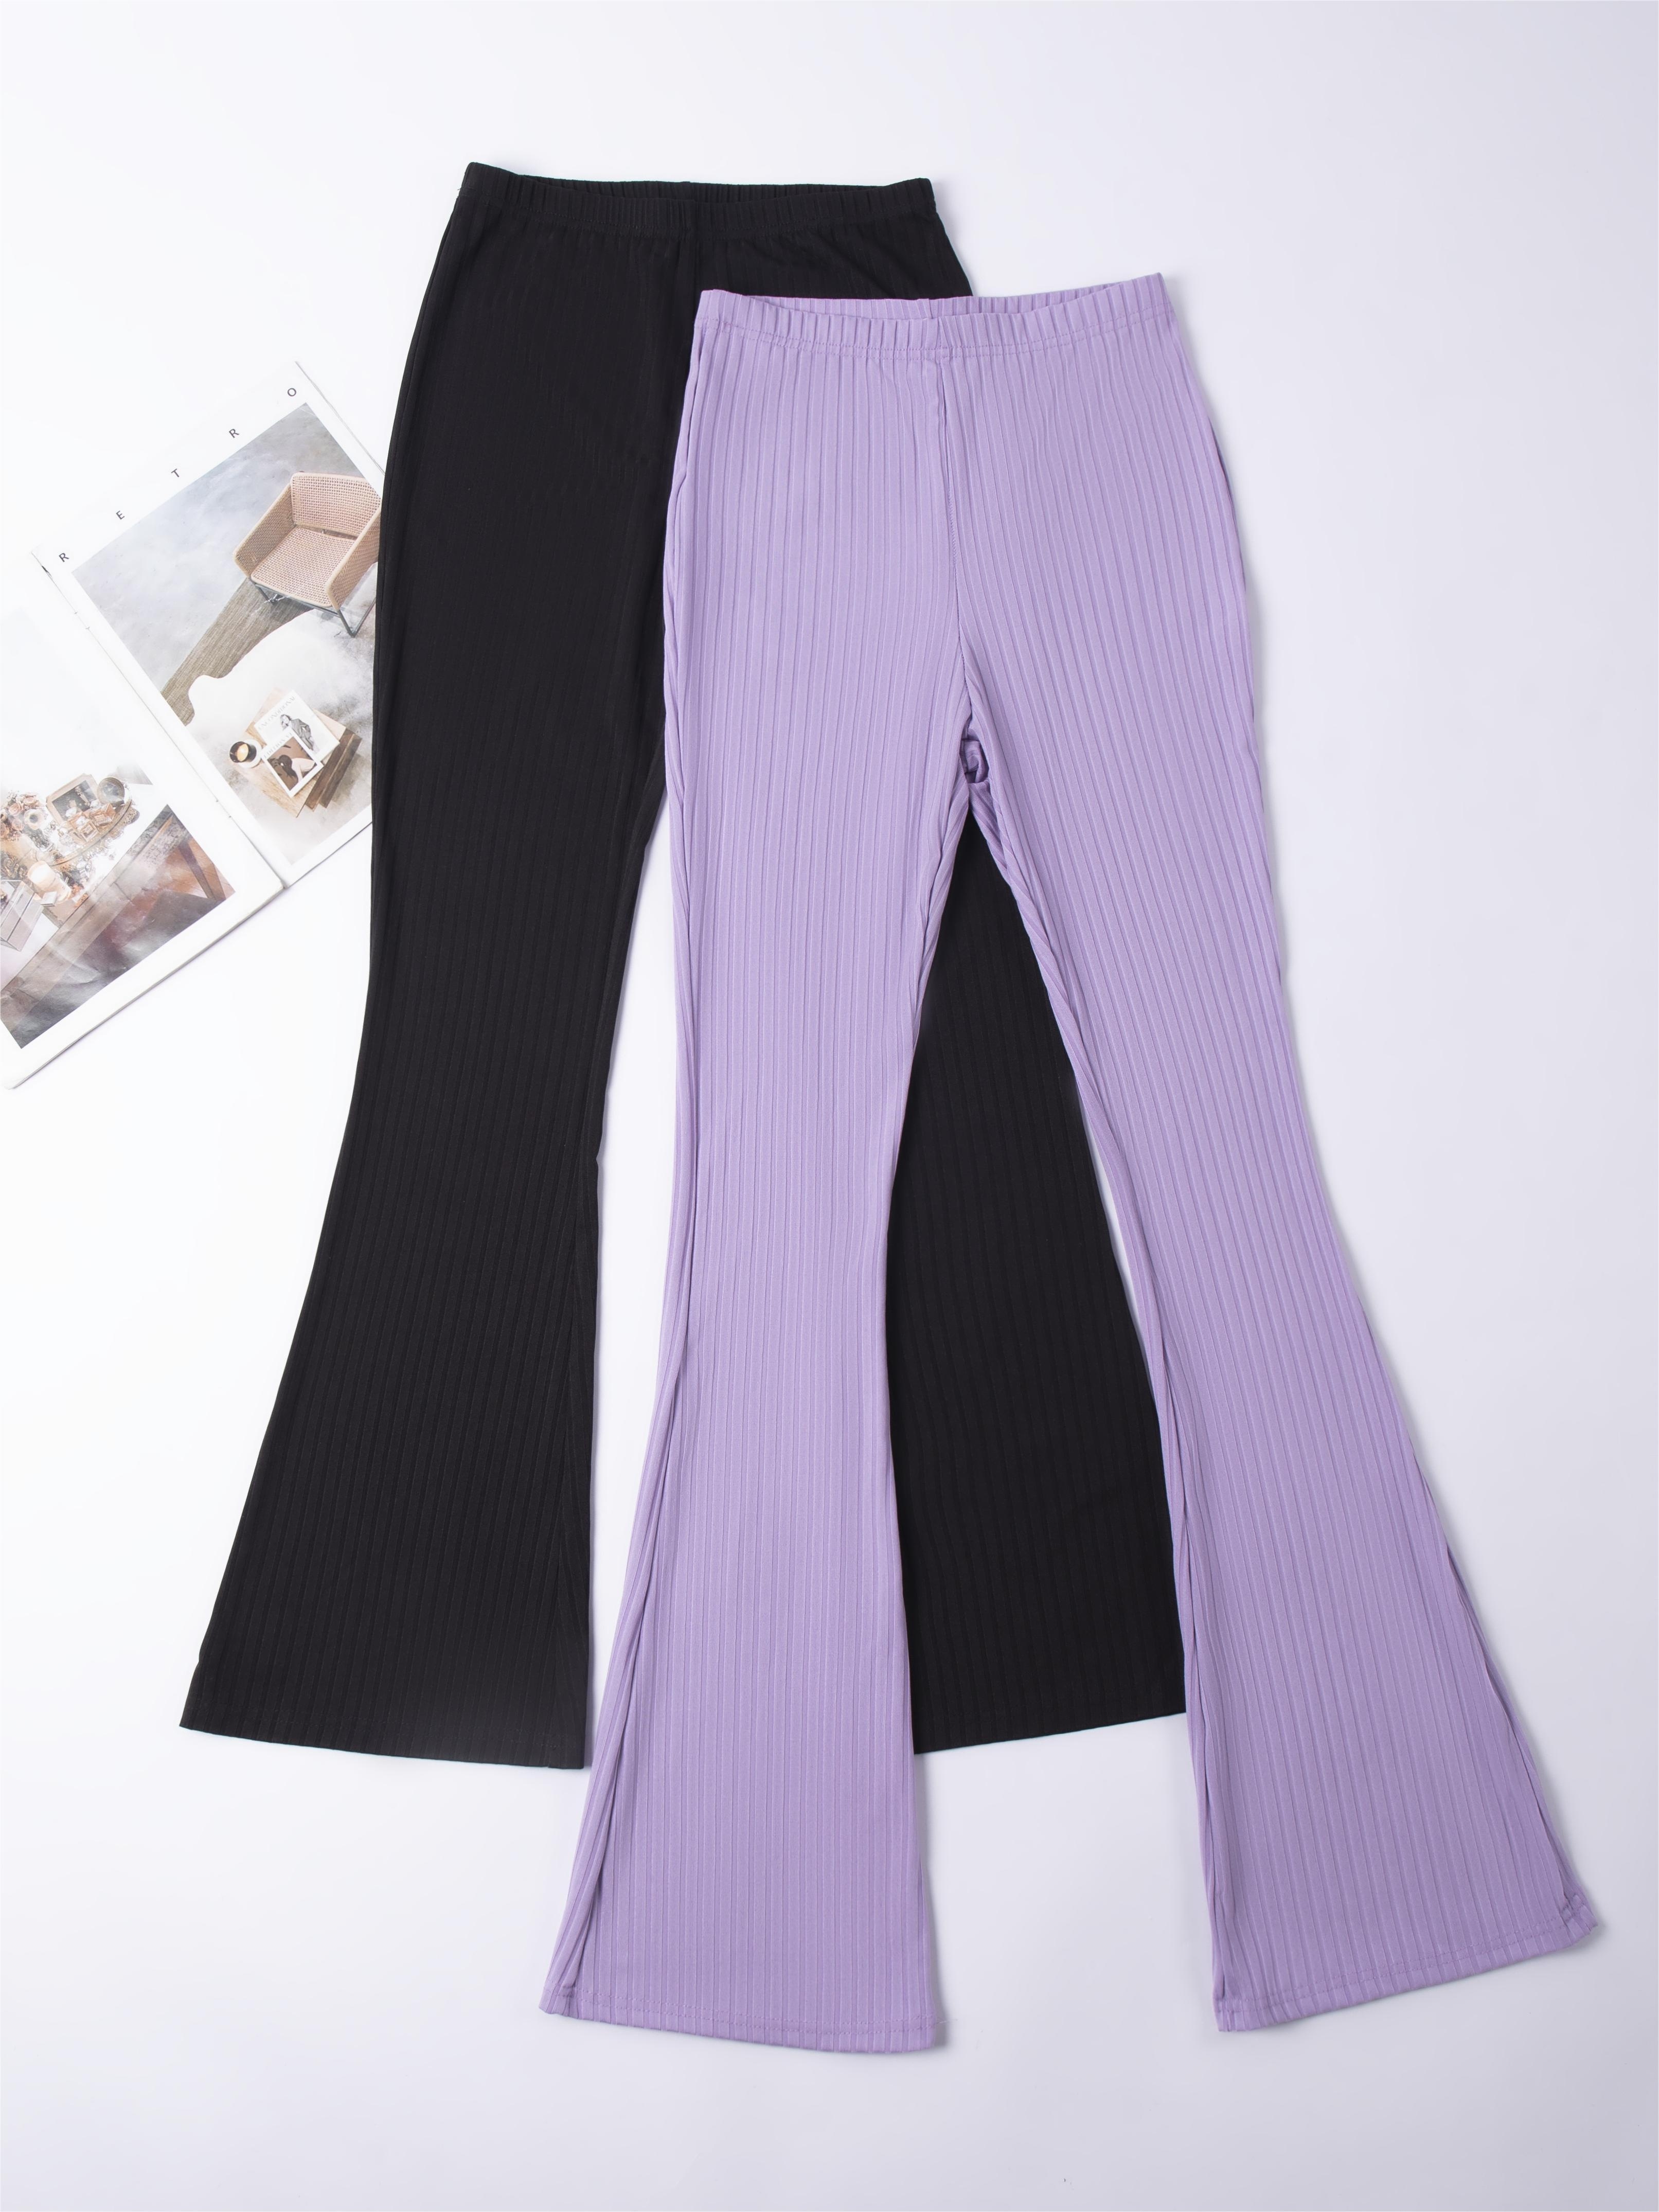 Solid Color Pocket Flare Leg Pants Quick Drying High Stretch